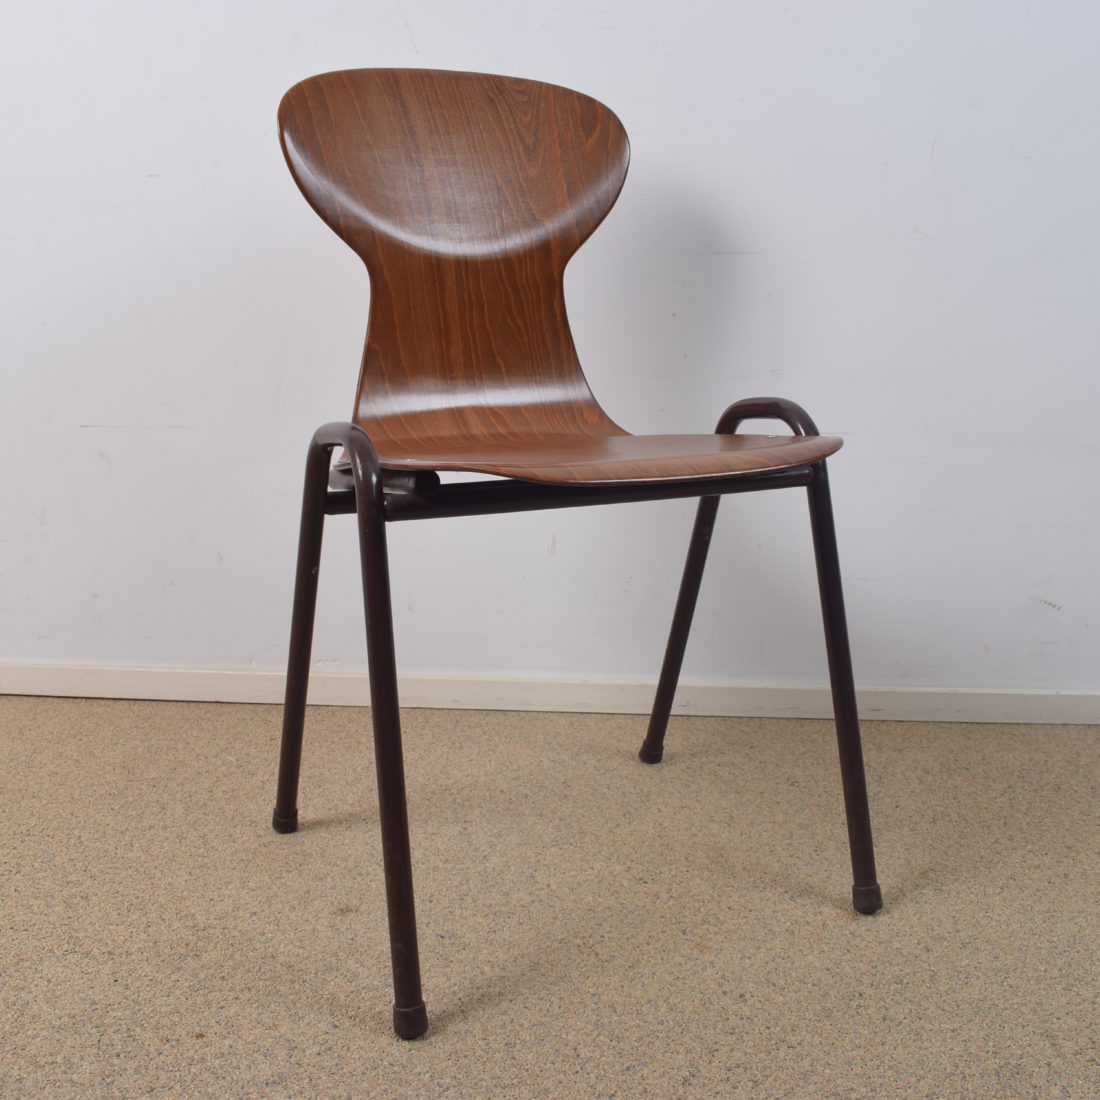 6x Obo brown industrial chair by Eromes SOLD | Howaboutout | vintage ...